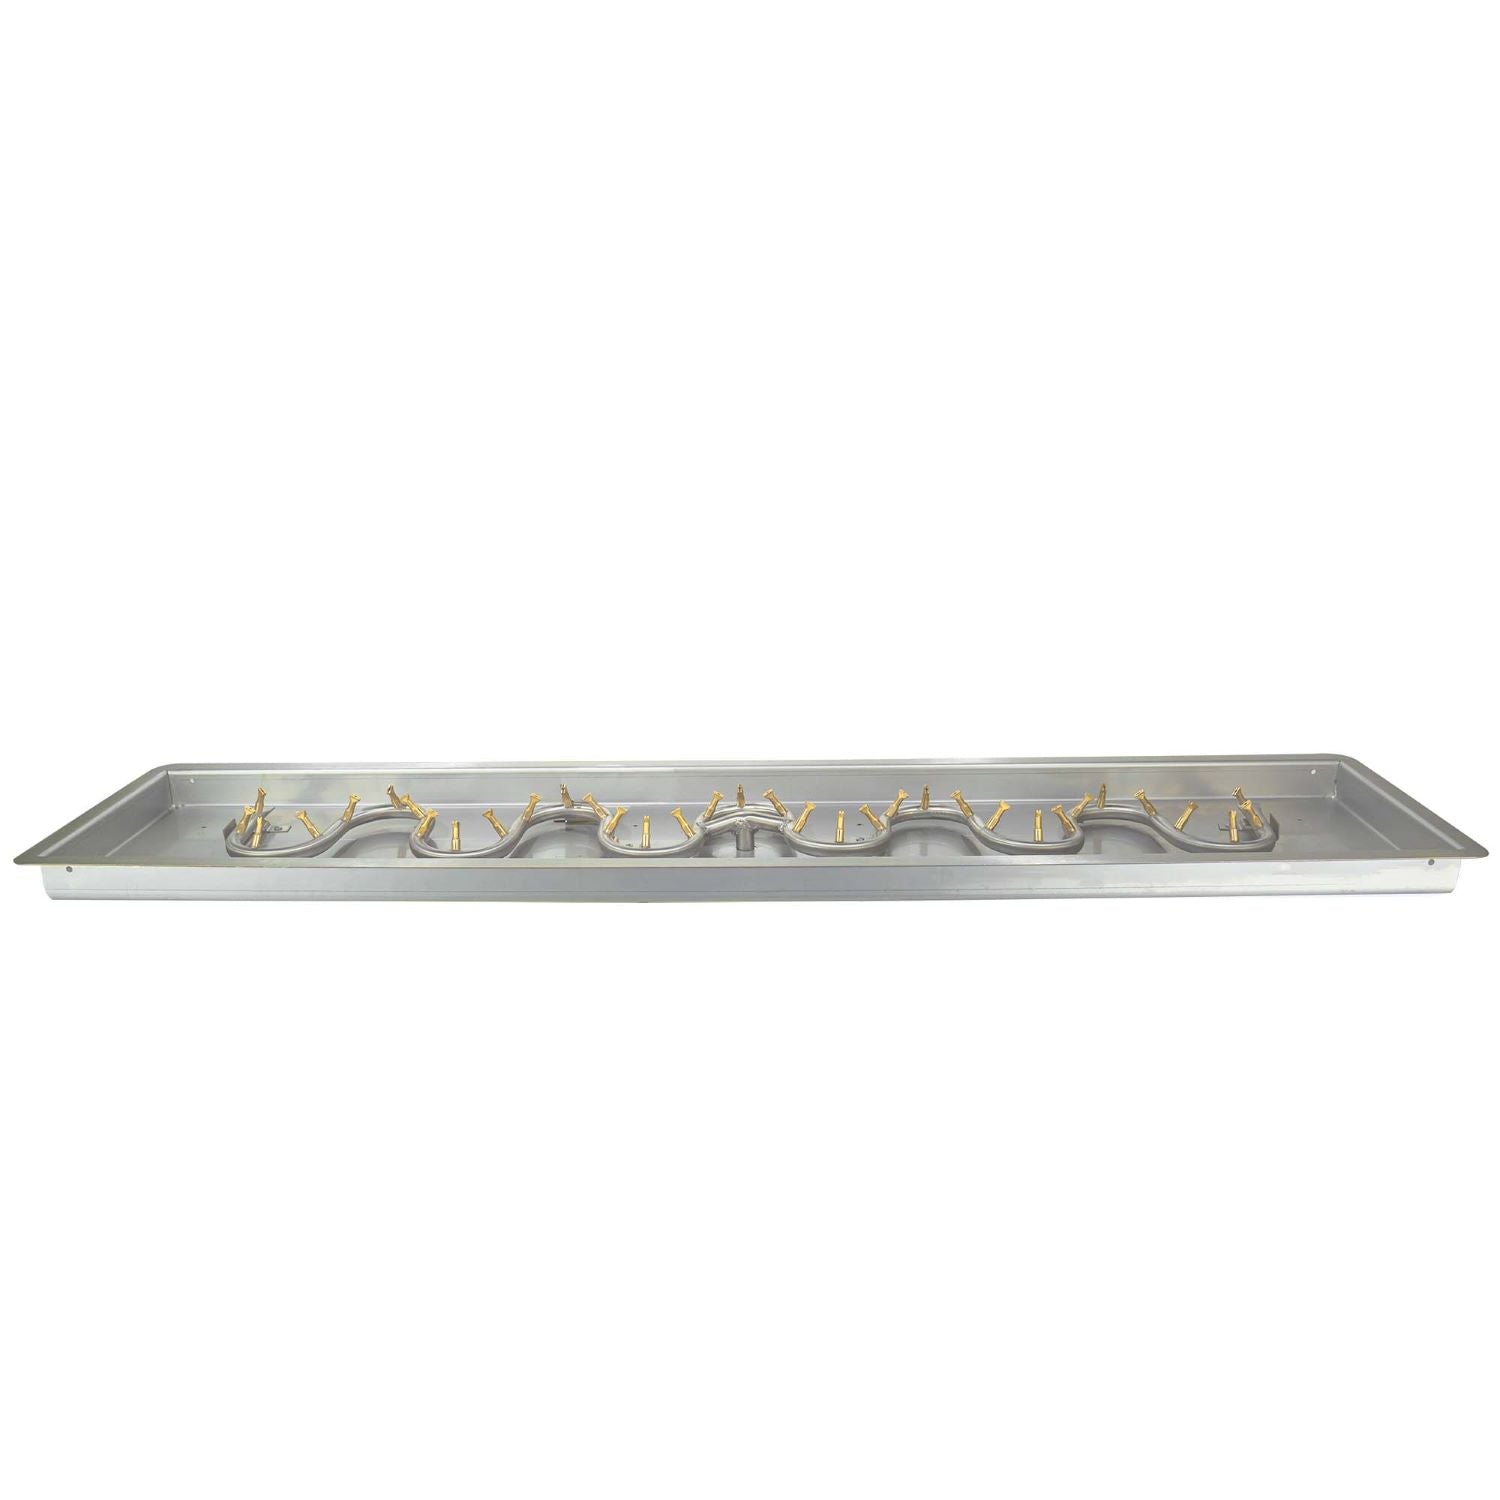 The Outdoor Plus Rectangular Drop-in Pan with Stainless Steel Switchback Bullet Burner